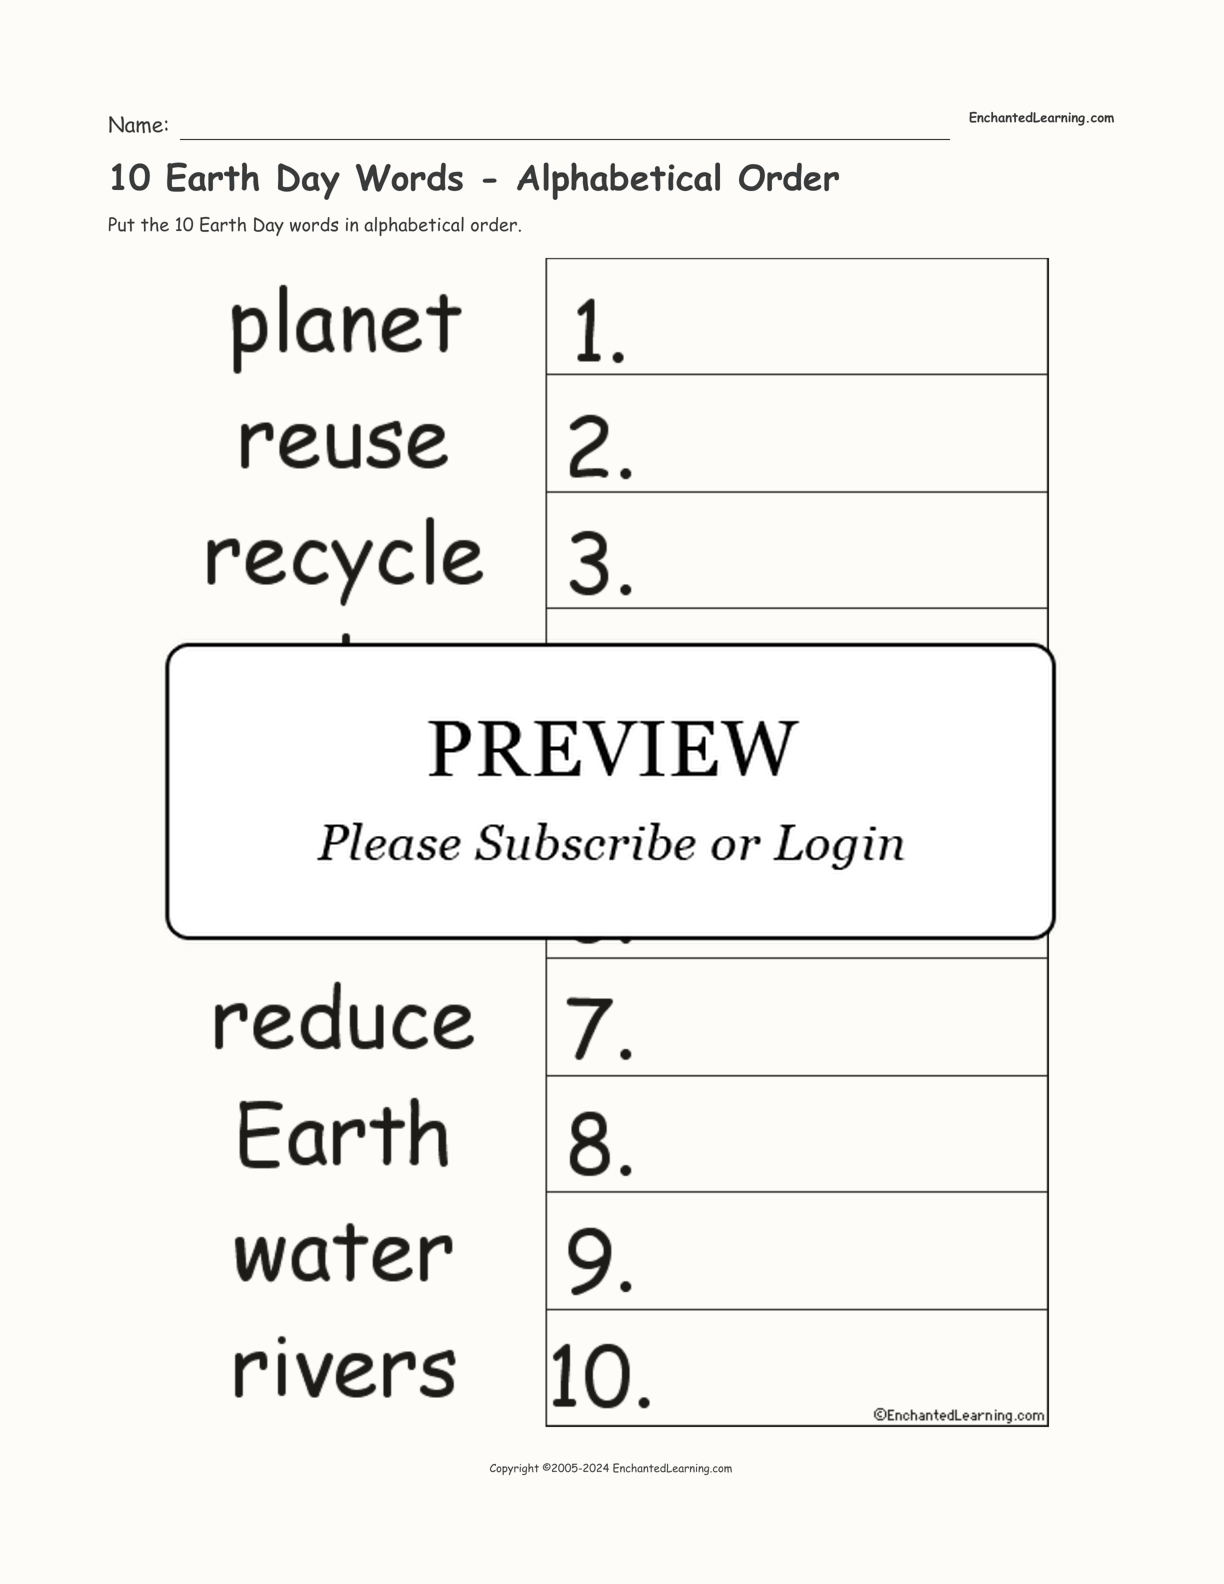 10 Earth Day Words - Alphabetical Order interactive worksheet page 1